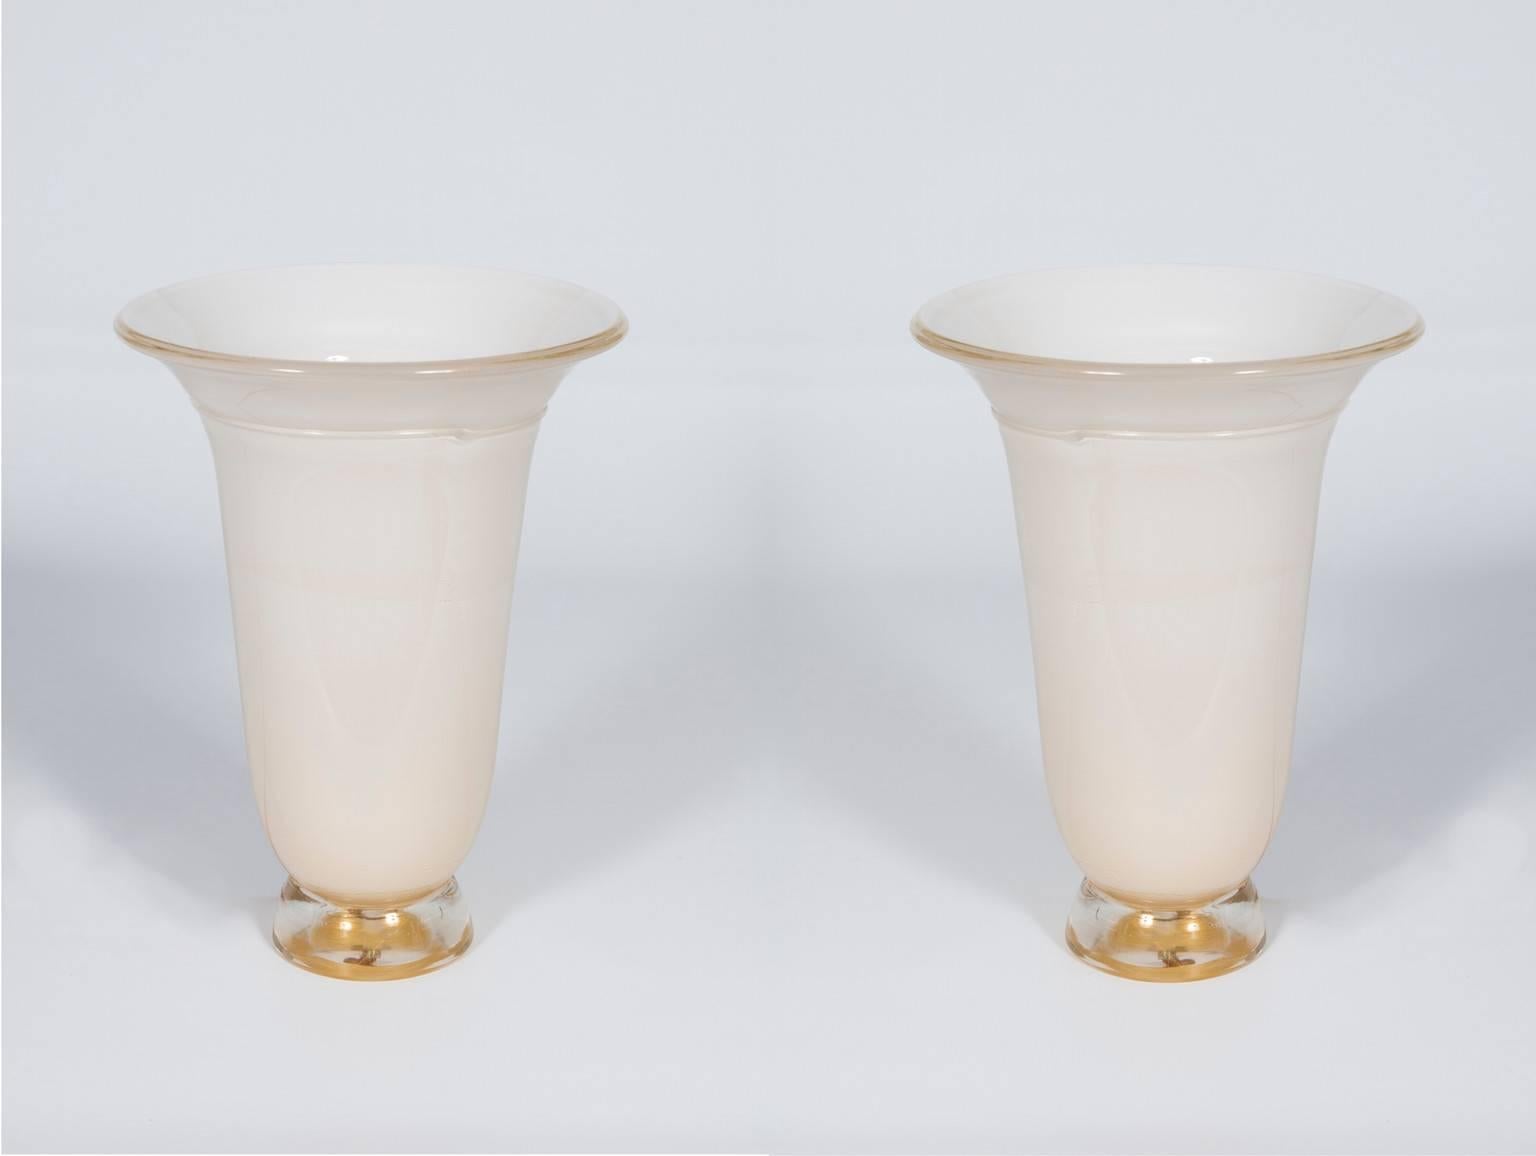 Italian Venetian, pair of table lamps, in blown murrain glass, white and gold,  1980s.
This is a unique set, of handcrafted blown Murano glass table lamps, in a shape of a vase, white milk color submersed in a gold thin layer of gold, that provides